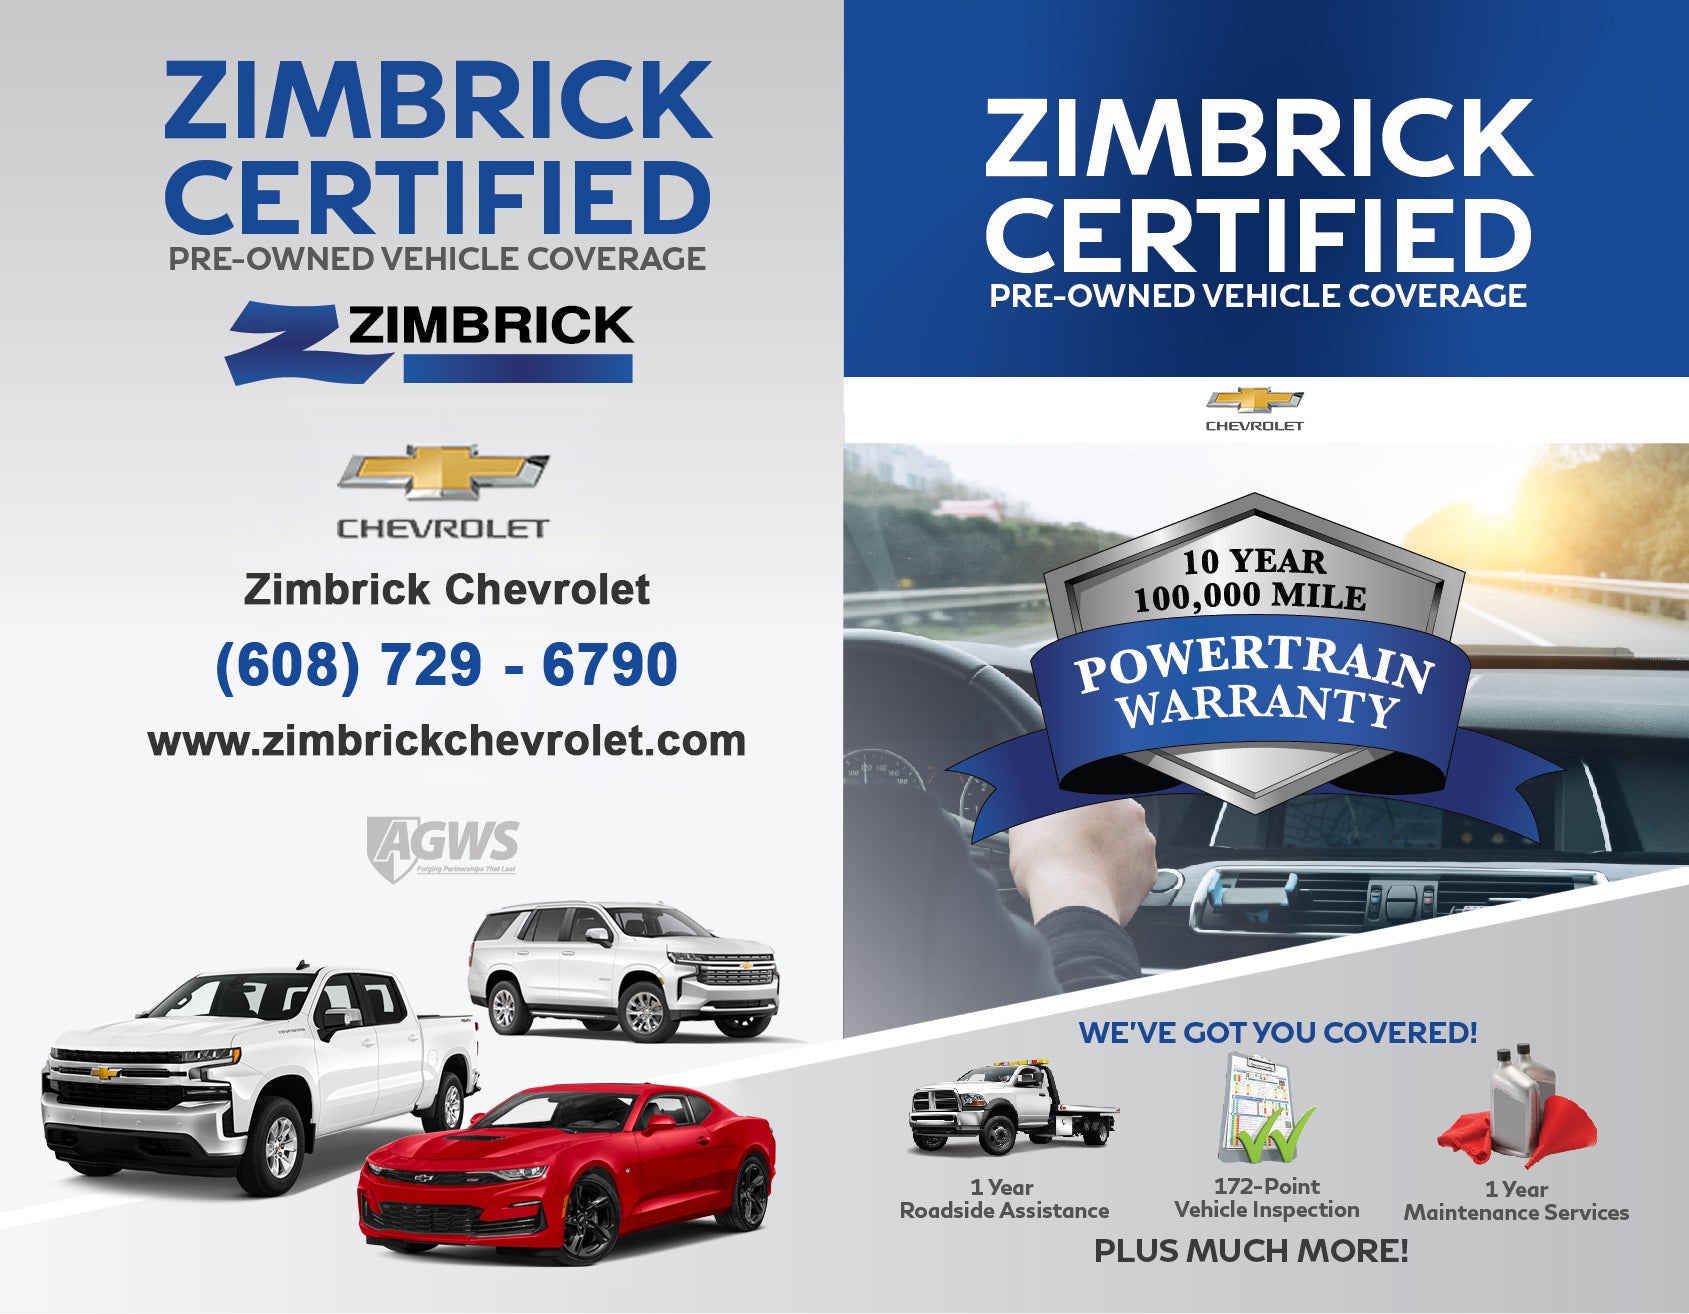 Zimbrick Certified Pre-Owned Vehicle Coverage Program